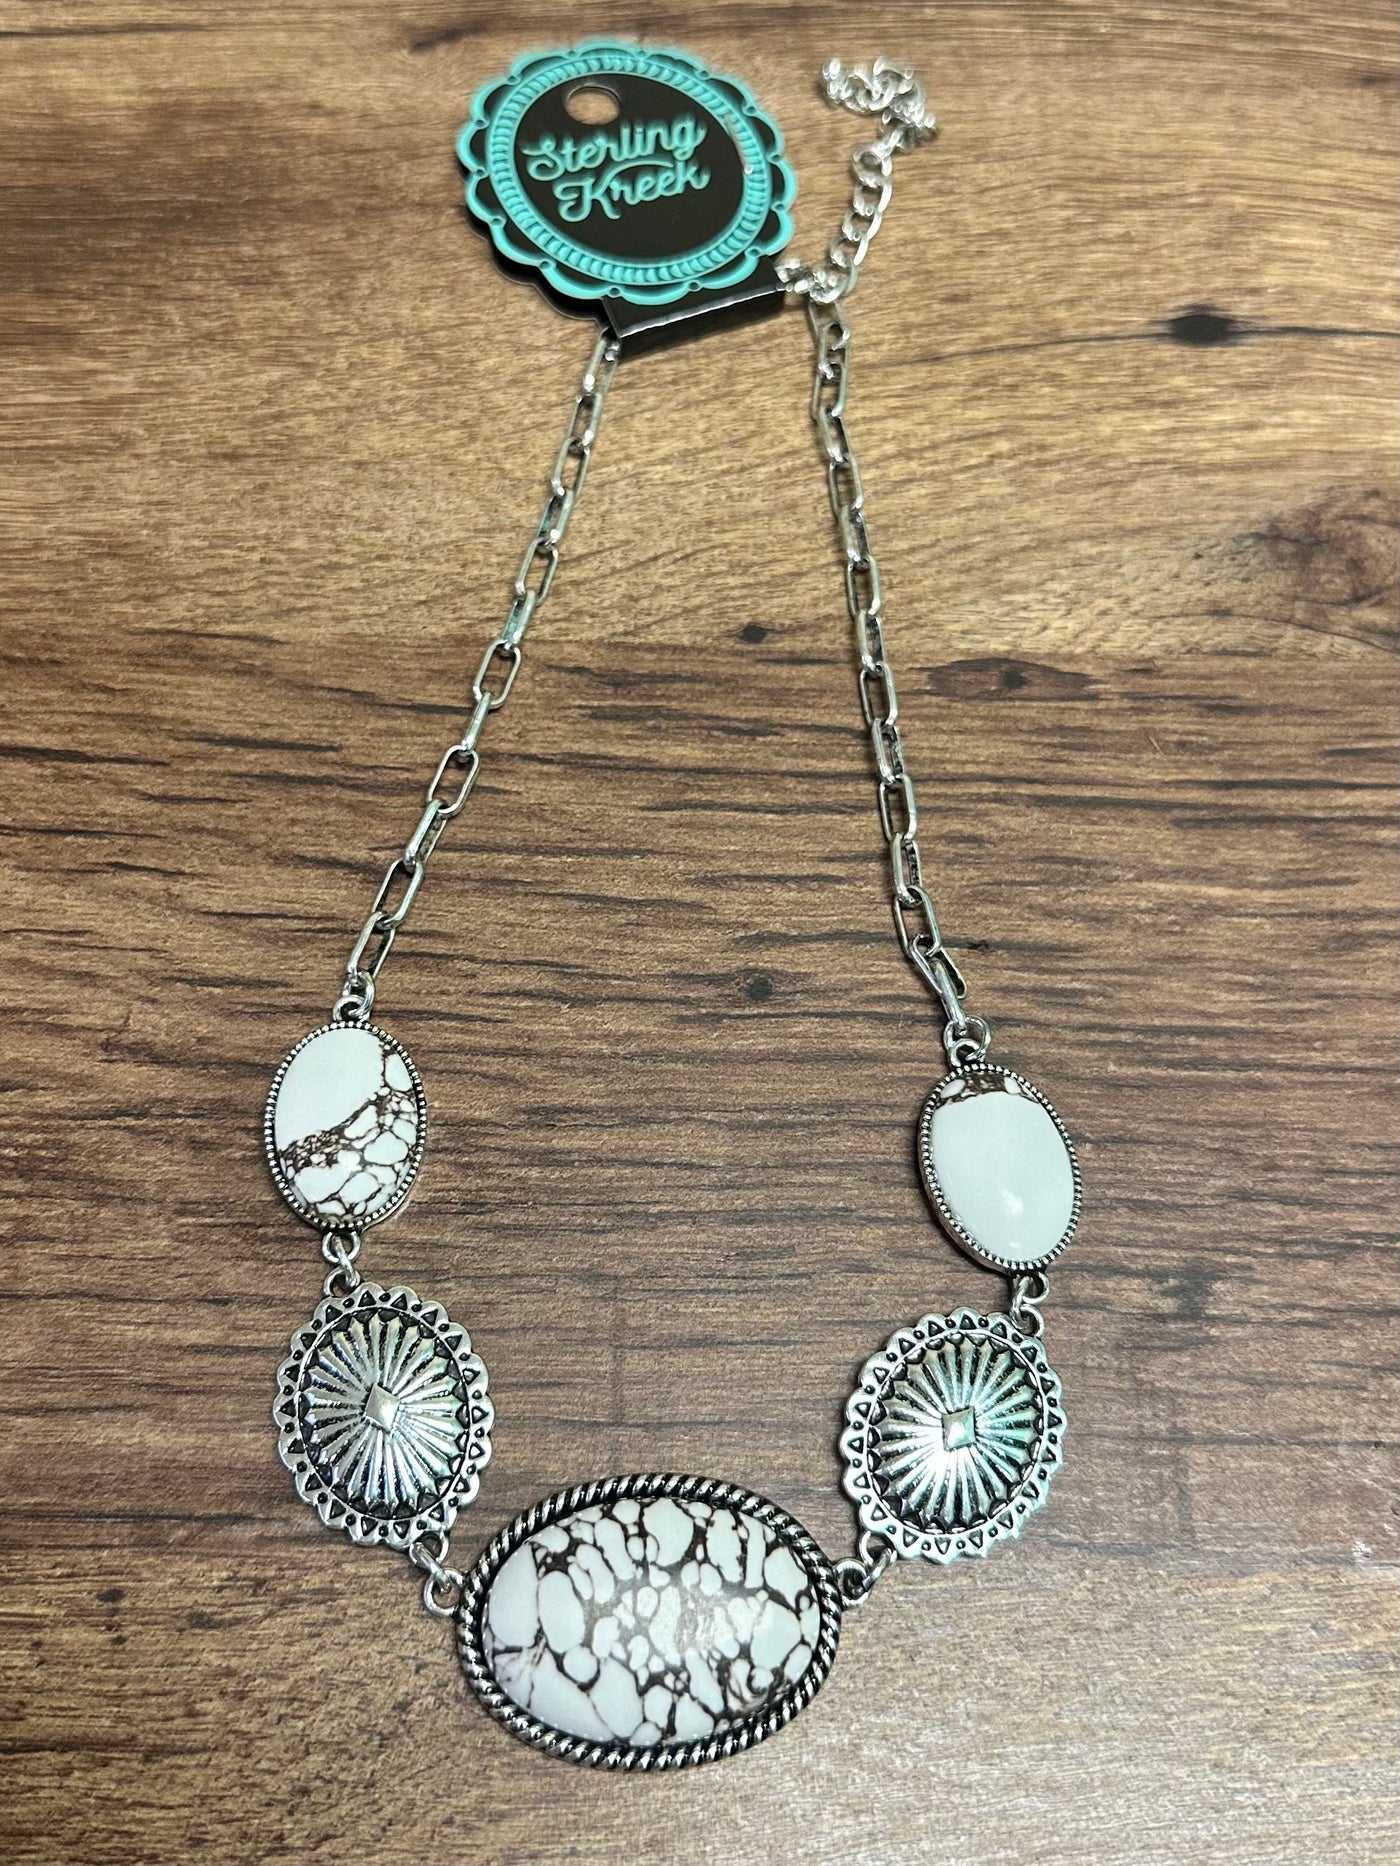 Southern Dixie Necklace